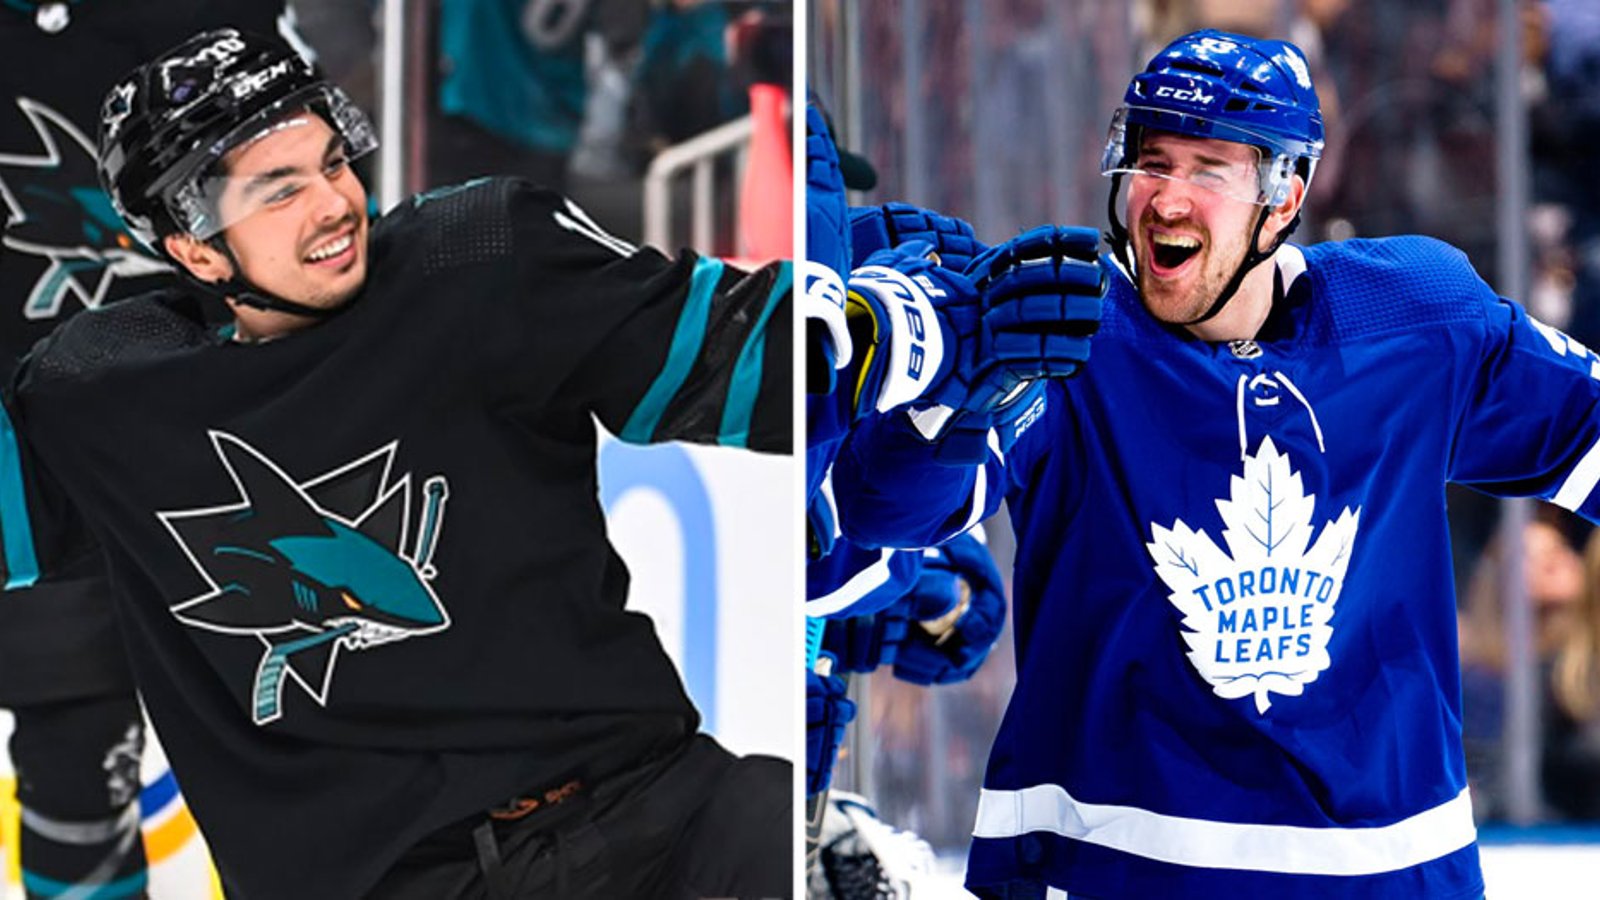 Two former 1st round picks give up on their NHL dreams